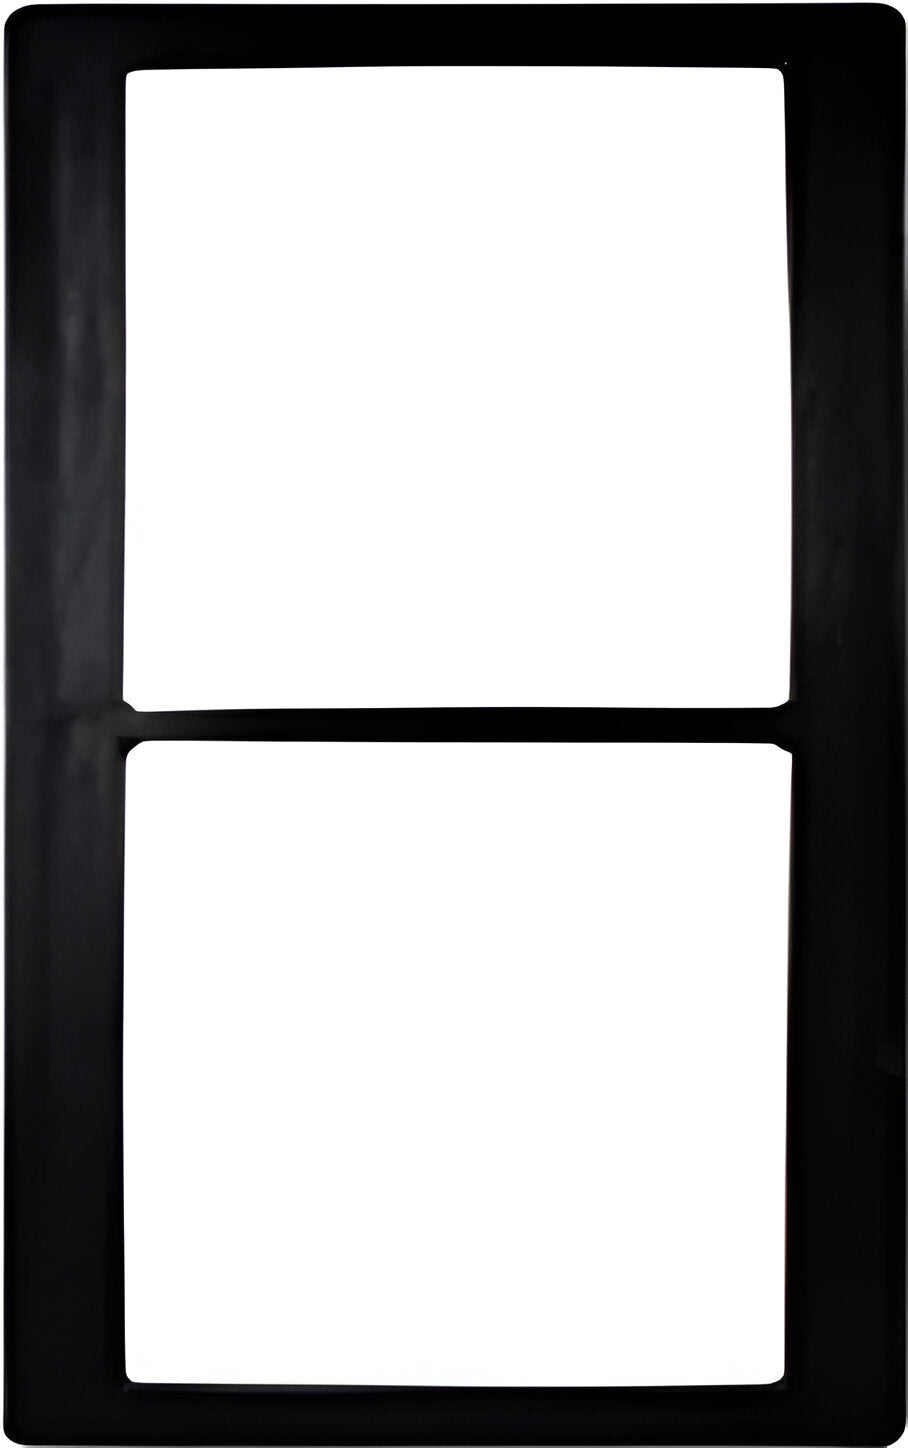 Bugambilia - Classic 20.82" x 12.75" Black Resin Coated Single Tile with Two Square Openings Fits For IS015 & IS025 & IS035 - T0A2